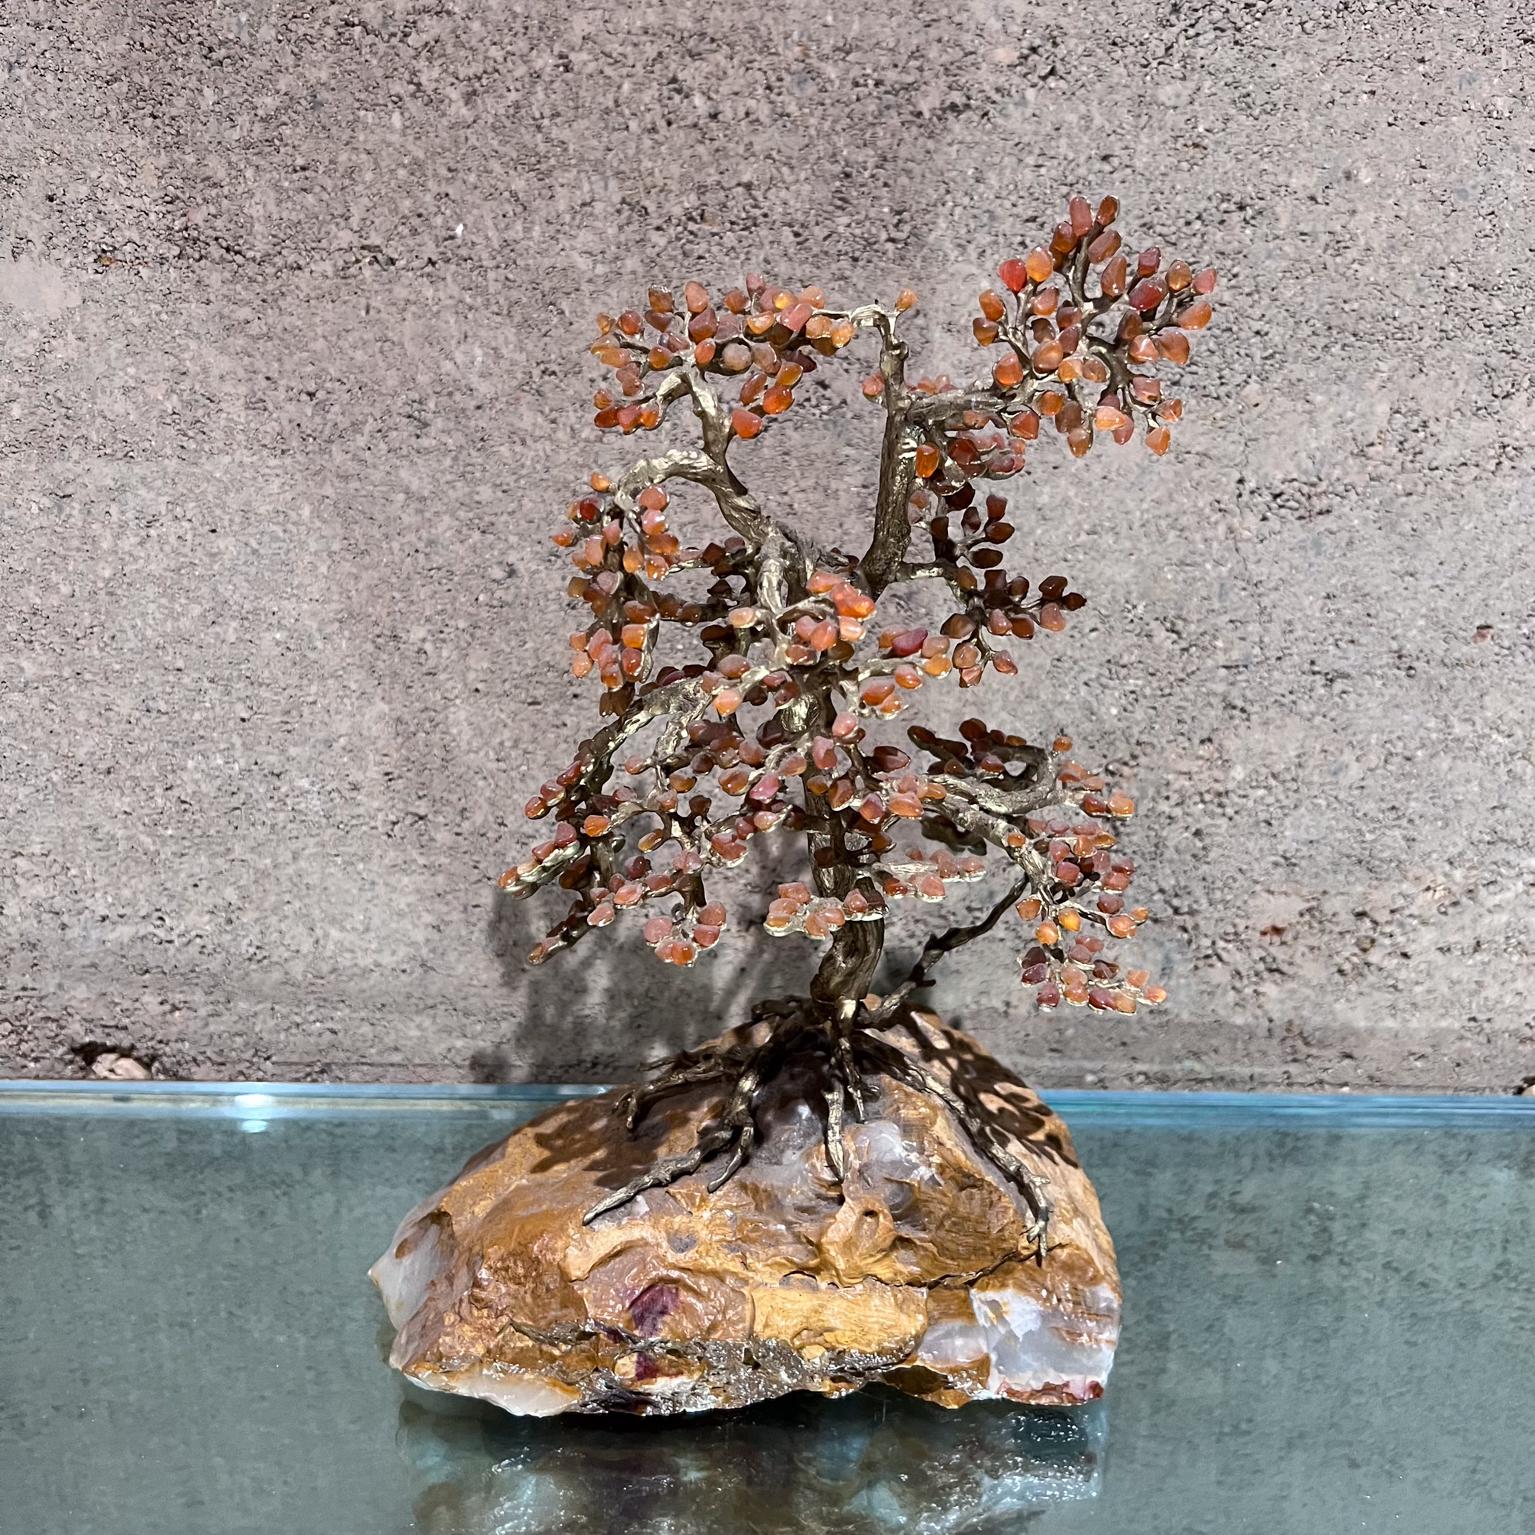 1970s table sculpture bonsai tree organic stone base
11 h x 7.75 w x 5 d
Original preowned vintage condition
Please review images provided.